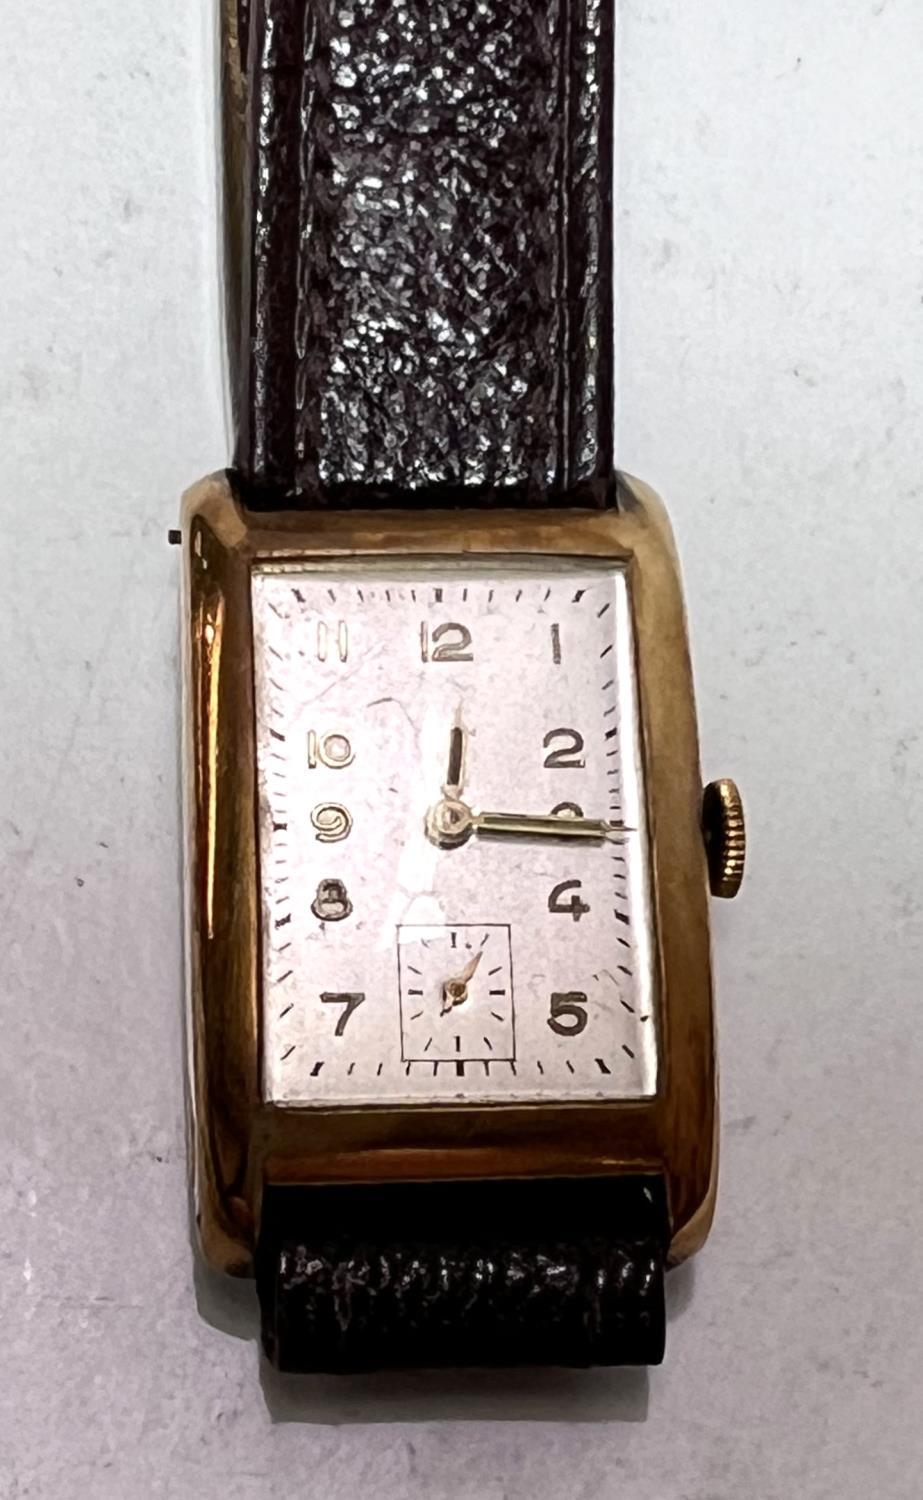 A 1930's gent's Tank watch with 18 carat gold case with Arabic numerals and seconds complication